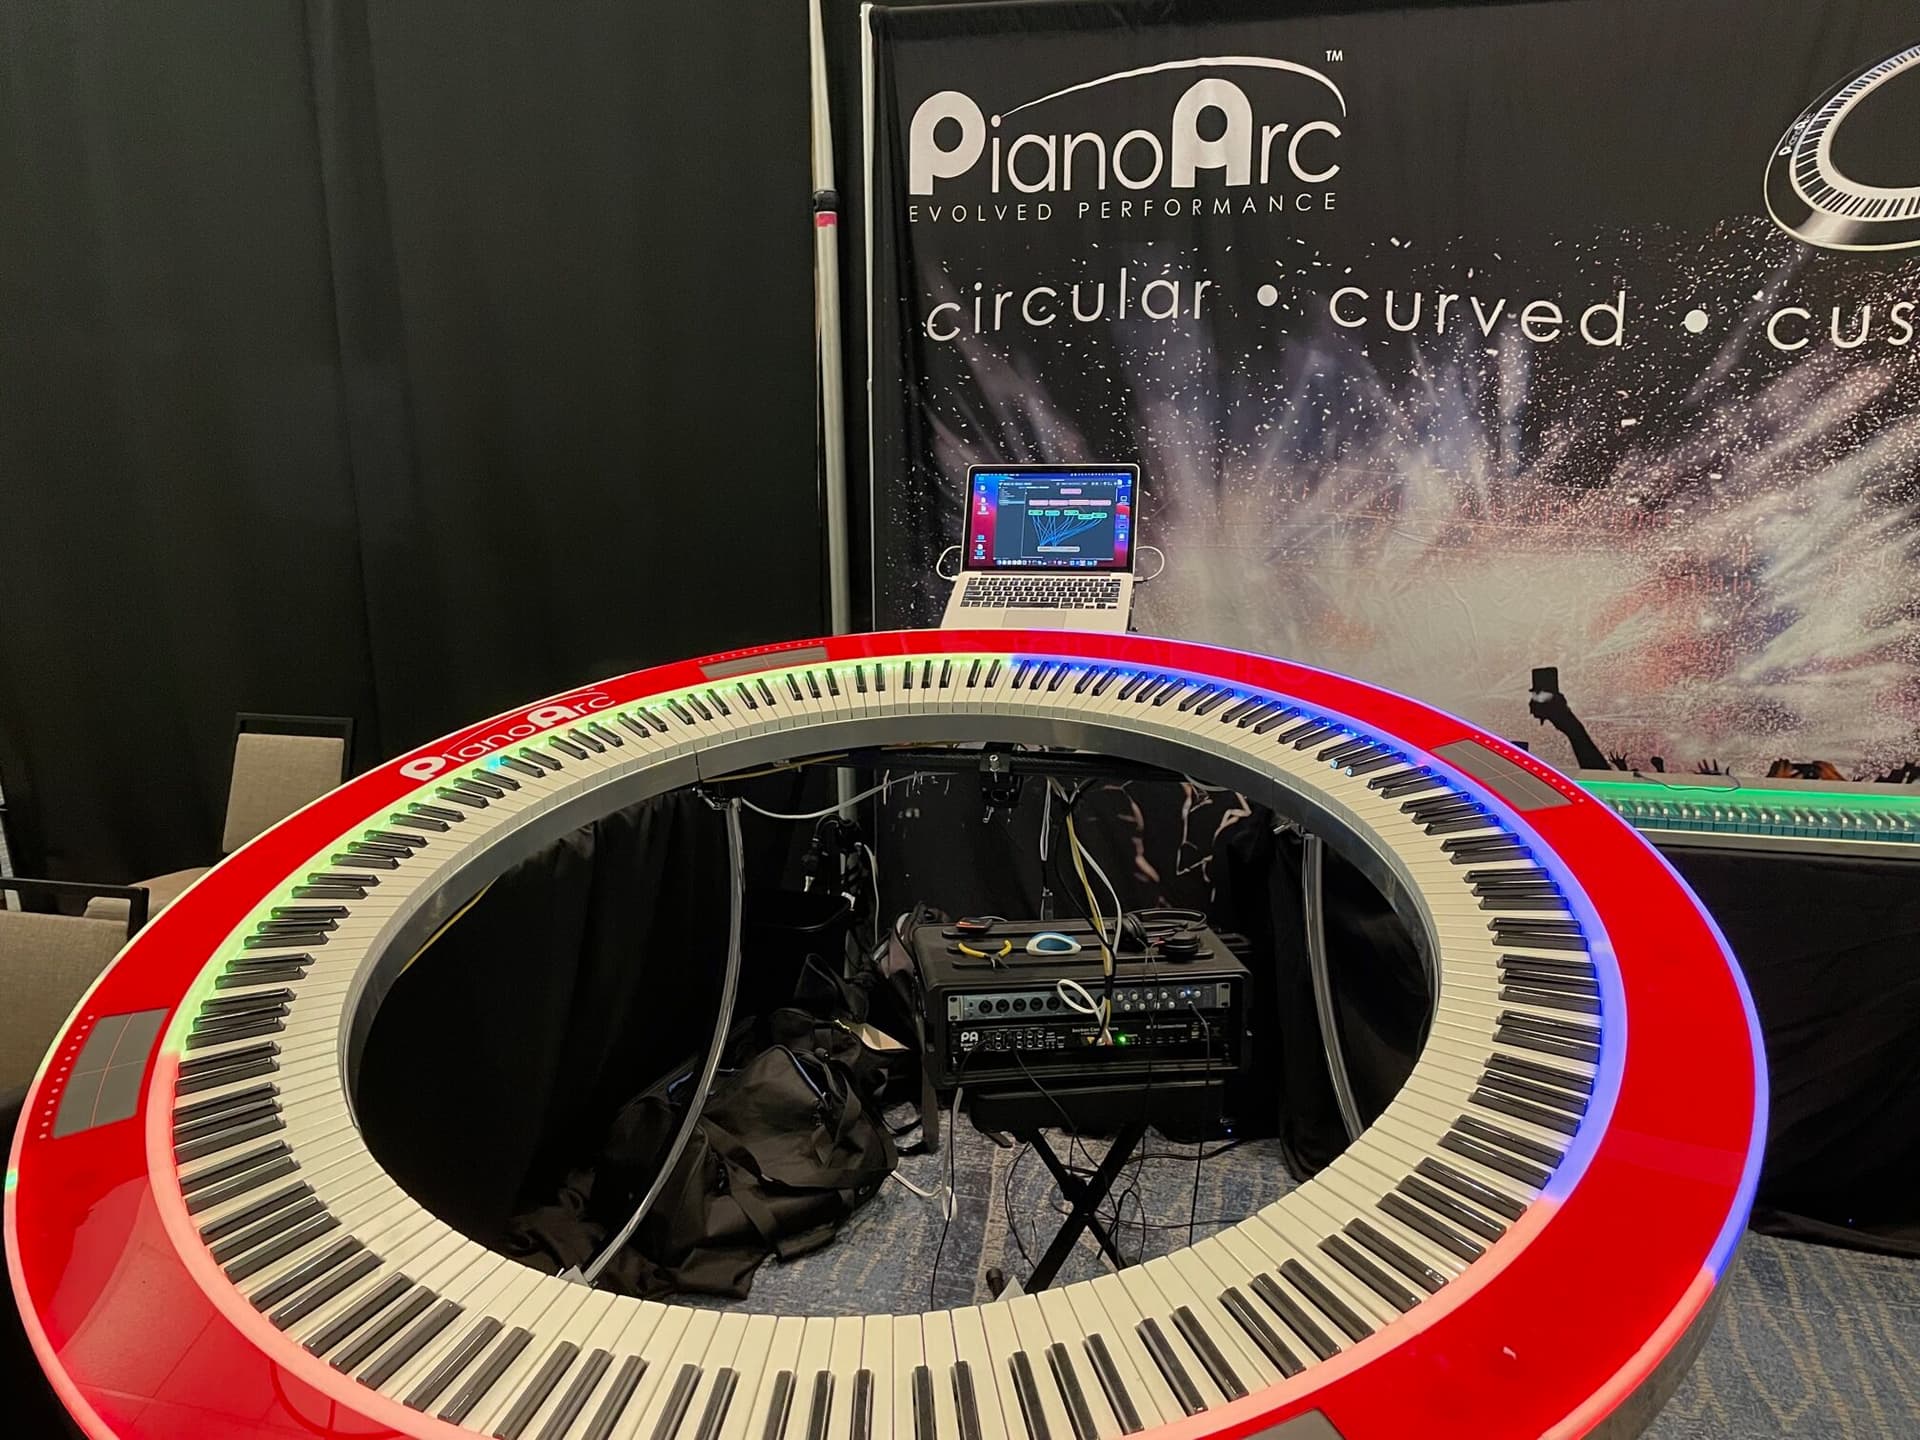 Gig Performer and PianoArc, Circle keyboard